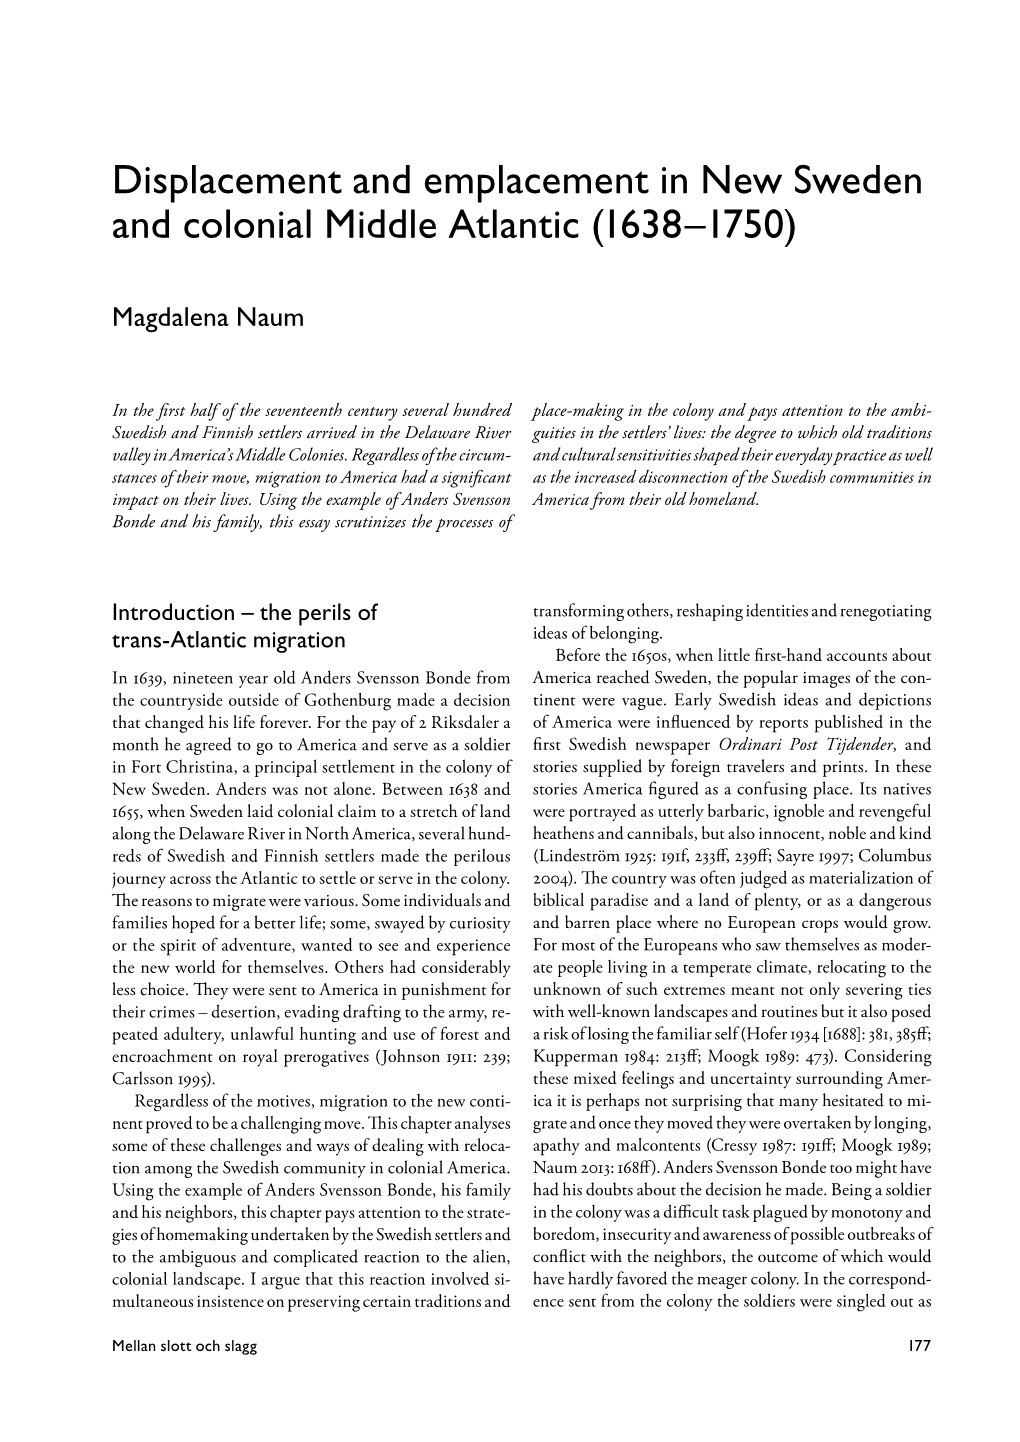 Displacement and Emplacement in New Sweden and Colonial Middle Atlantic (1638–1750)